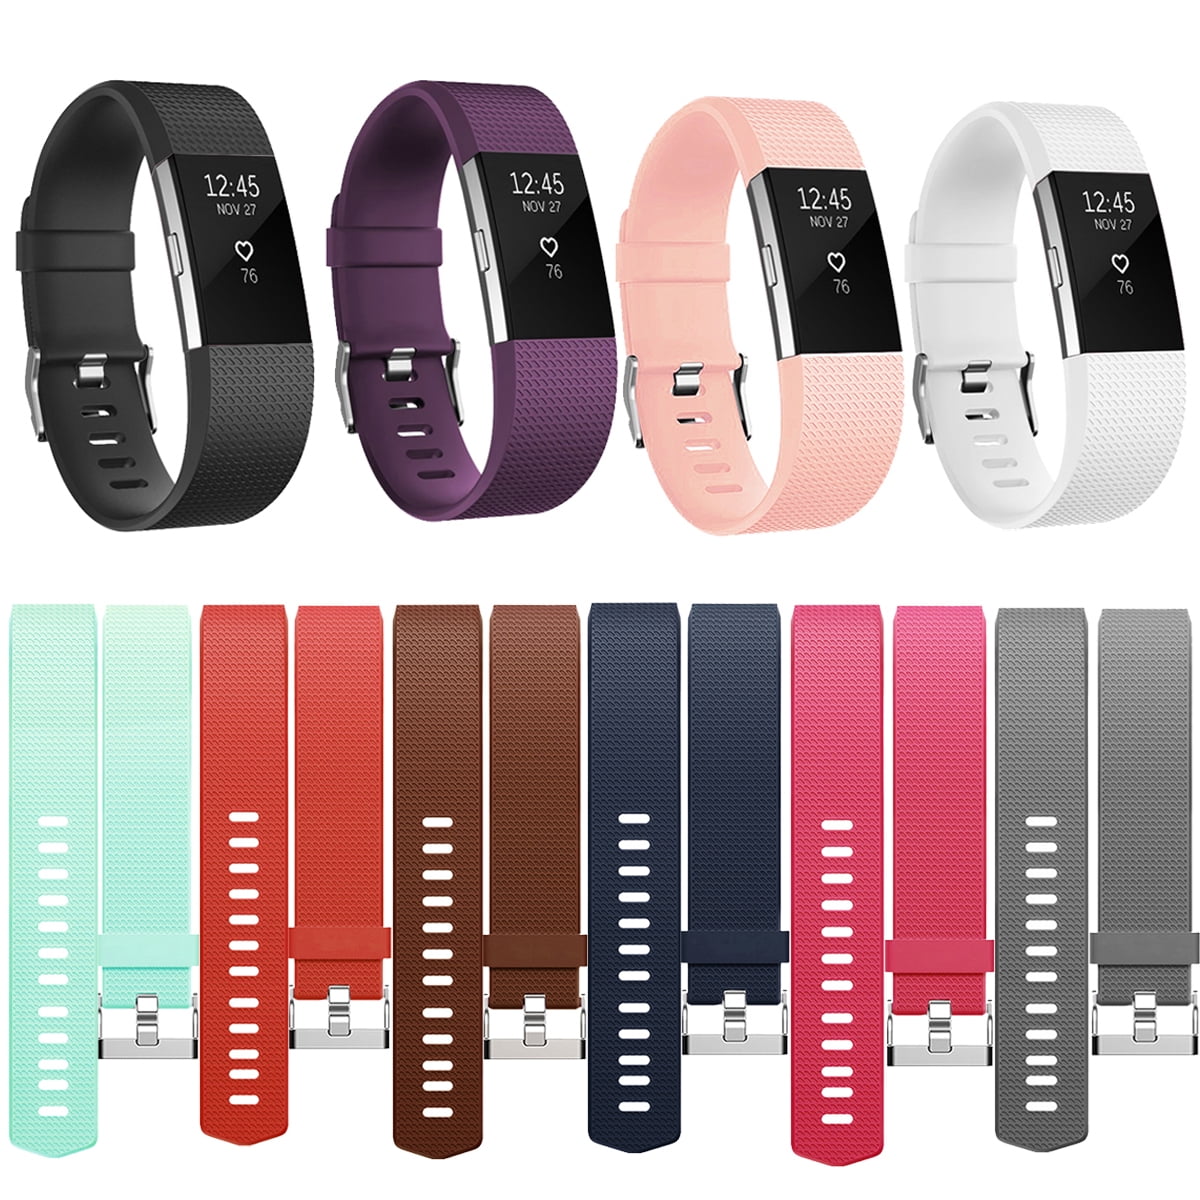 fitbit charge hr